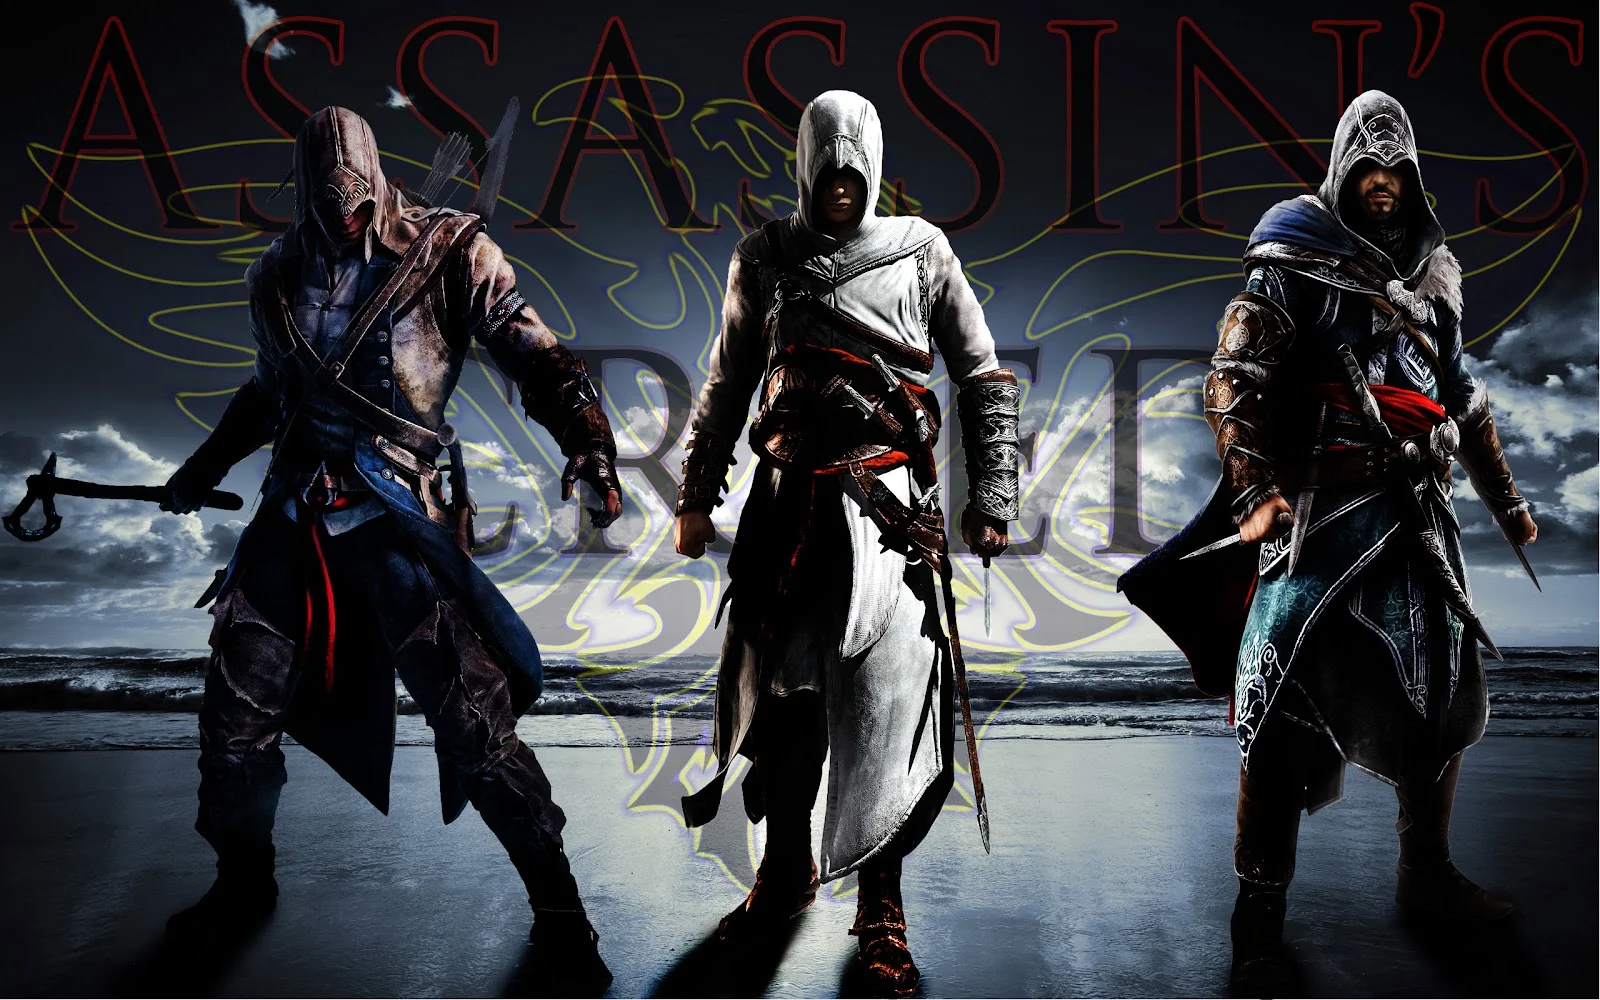 Assassin's Creed Character Images - Altair, Ezio, and Connor in various poses